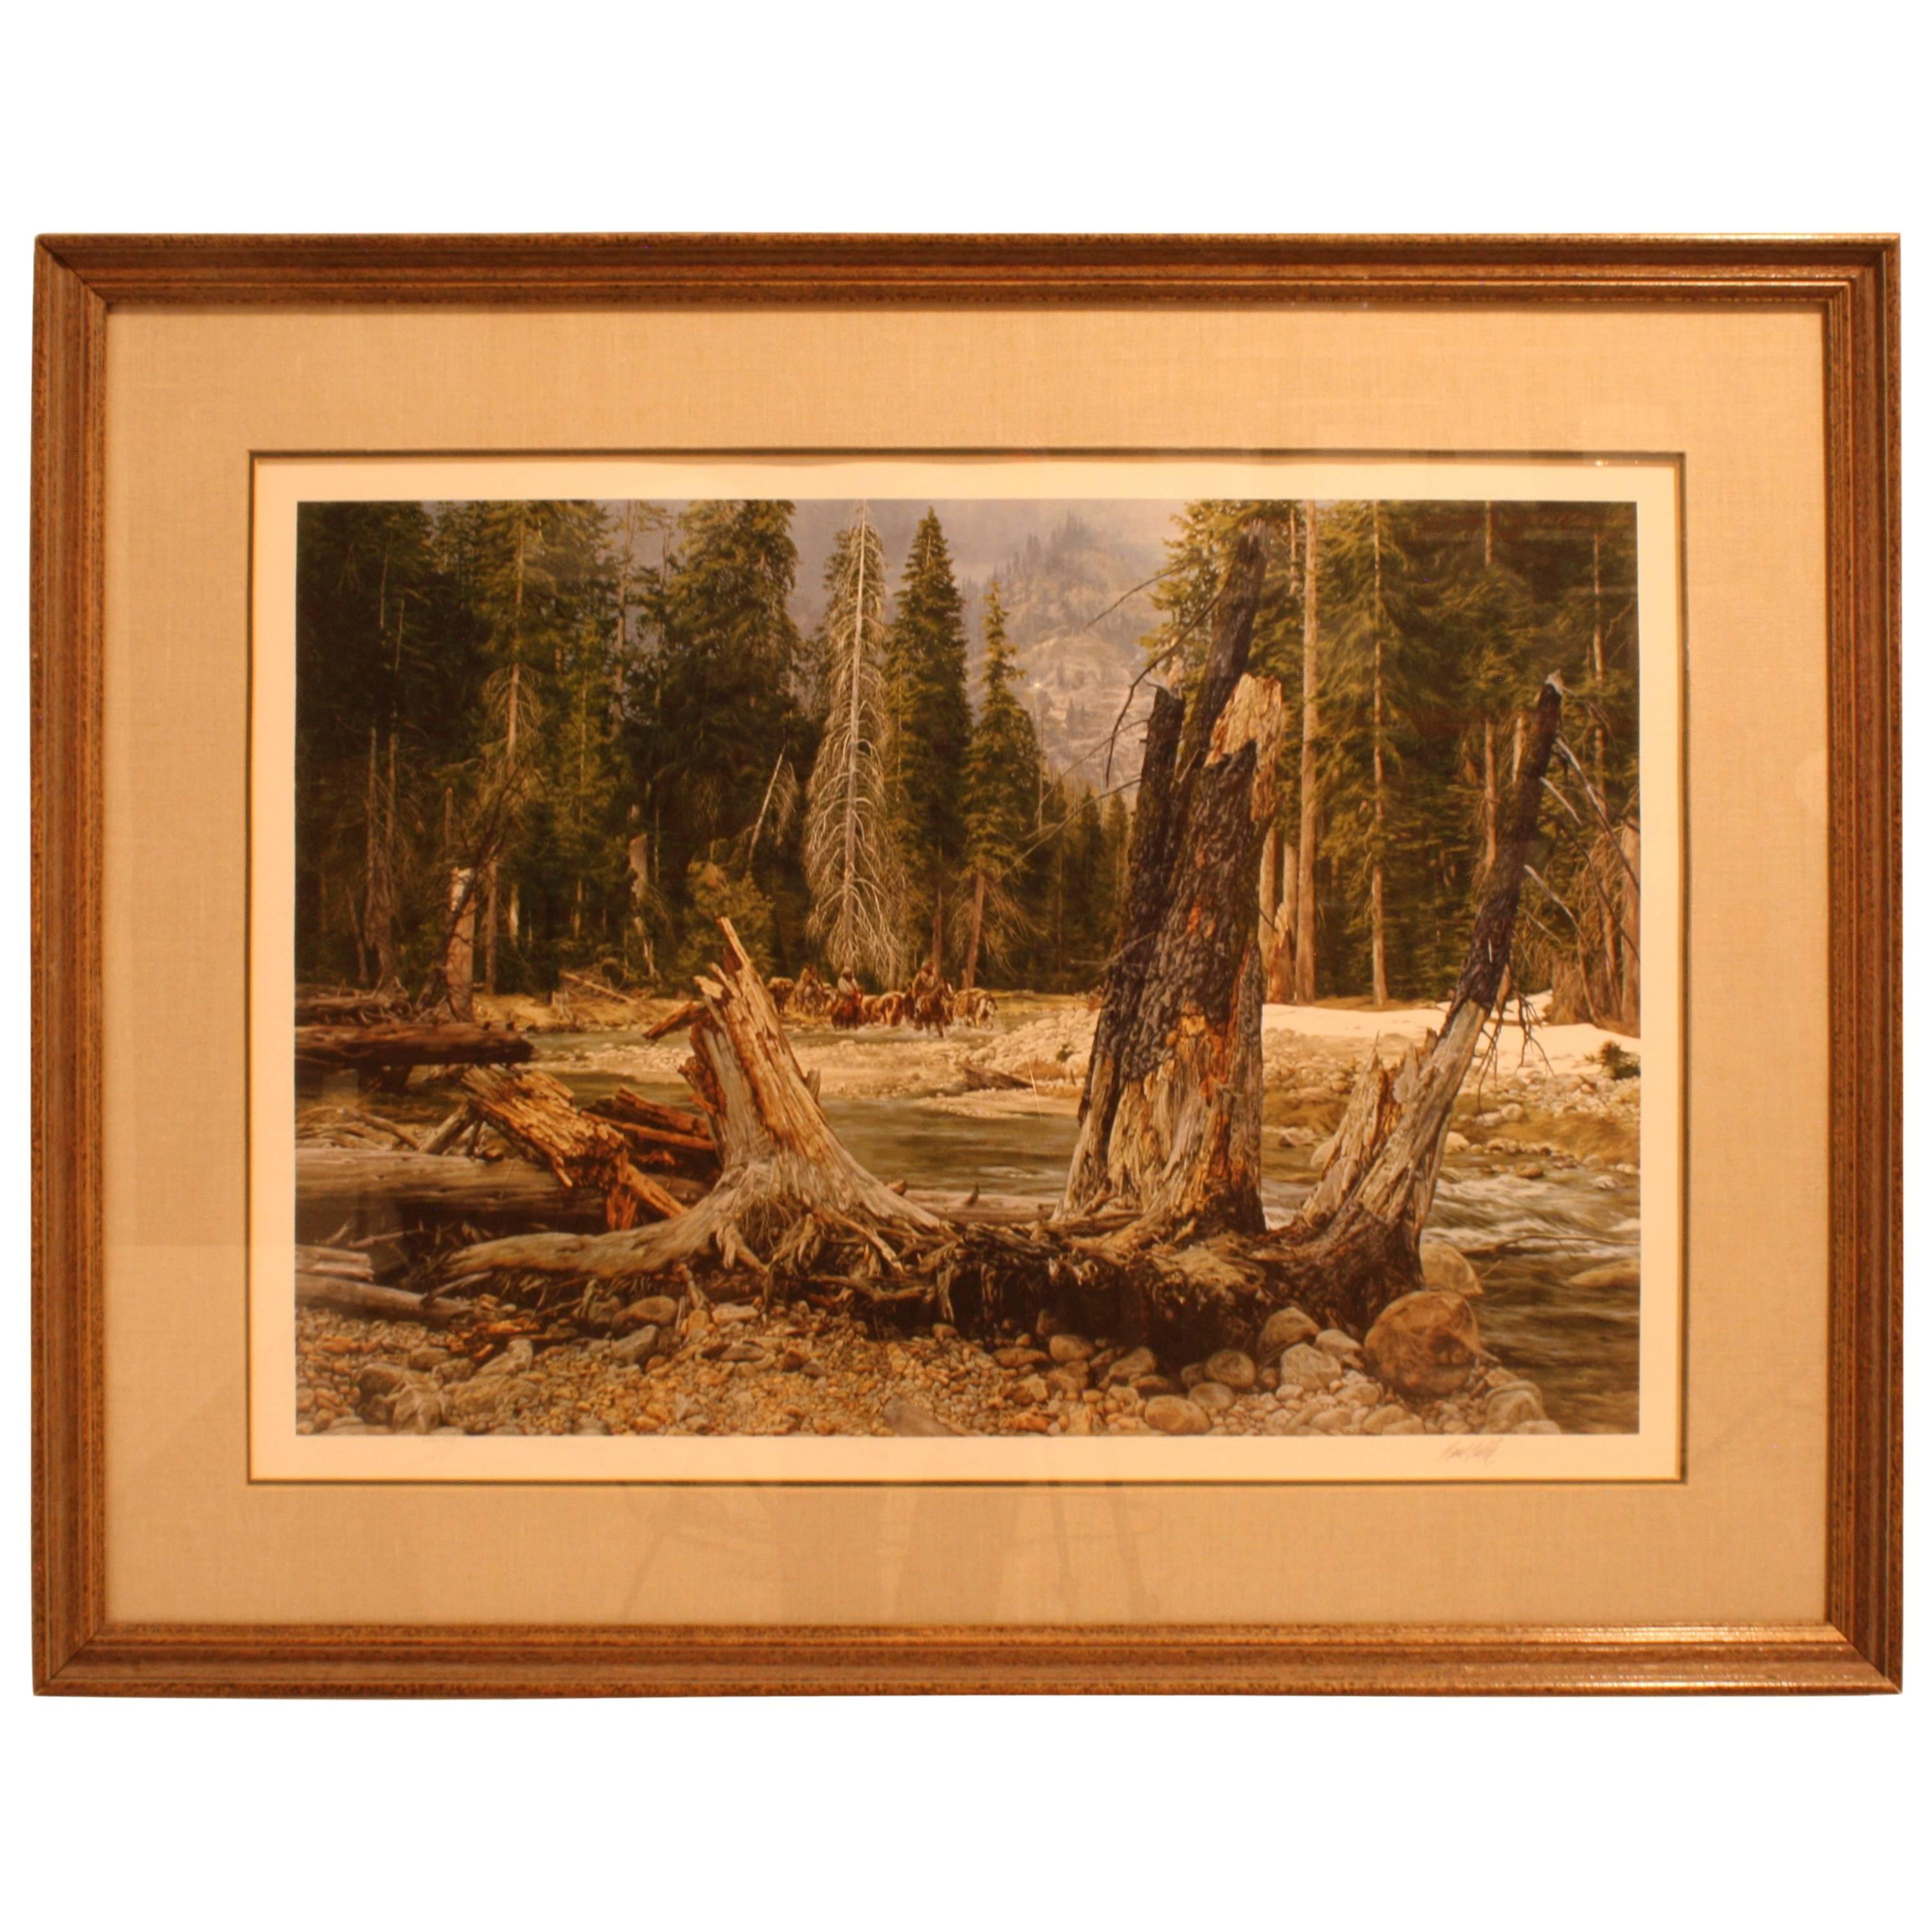 Paul Calle "In Search of Beaver" Signed Le Artist Print # 652/950